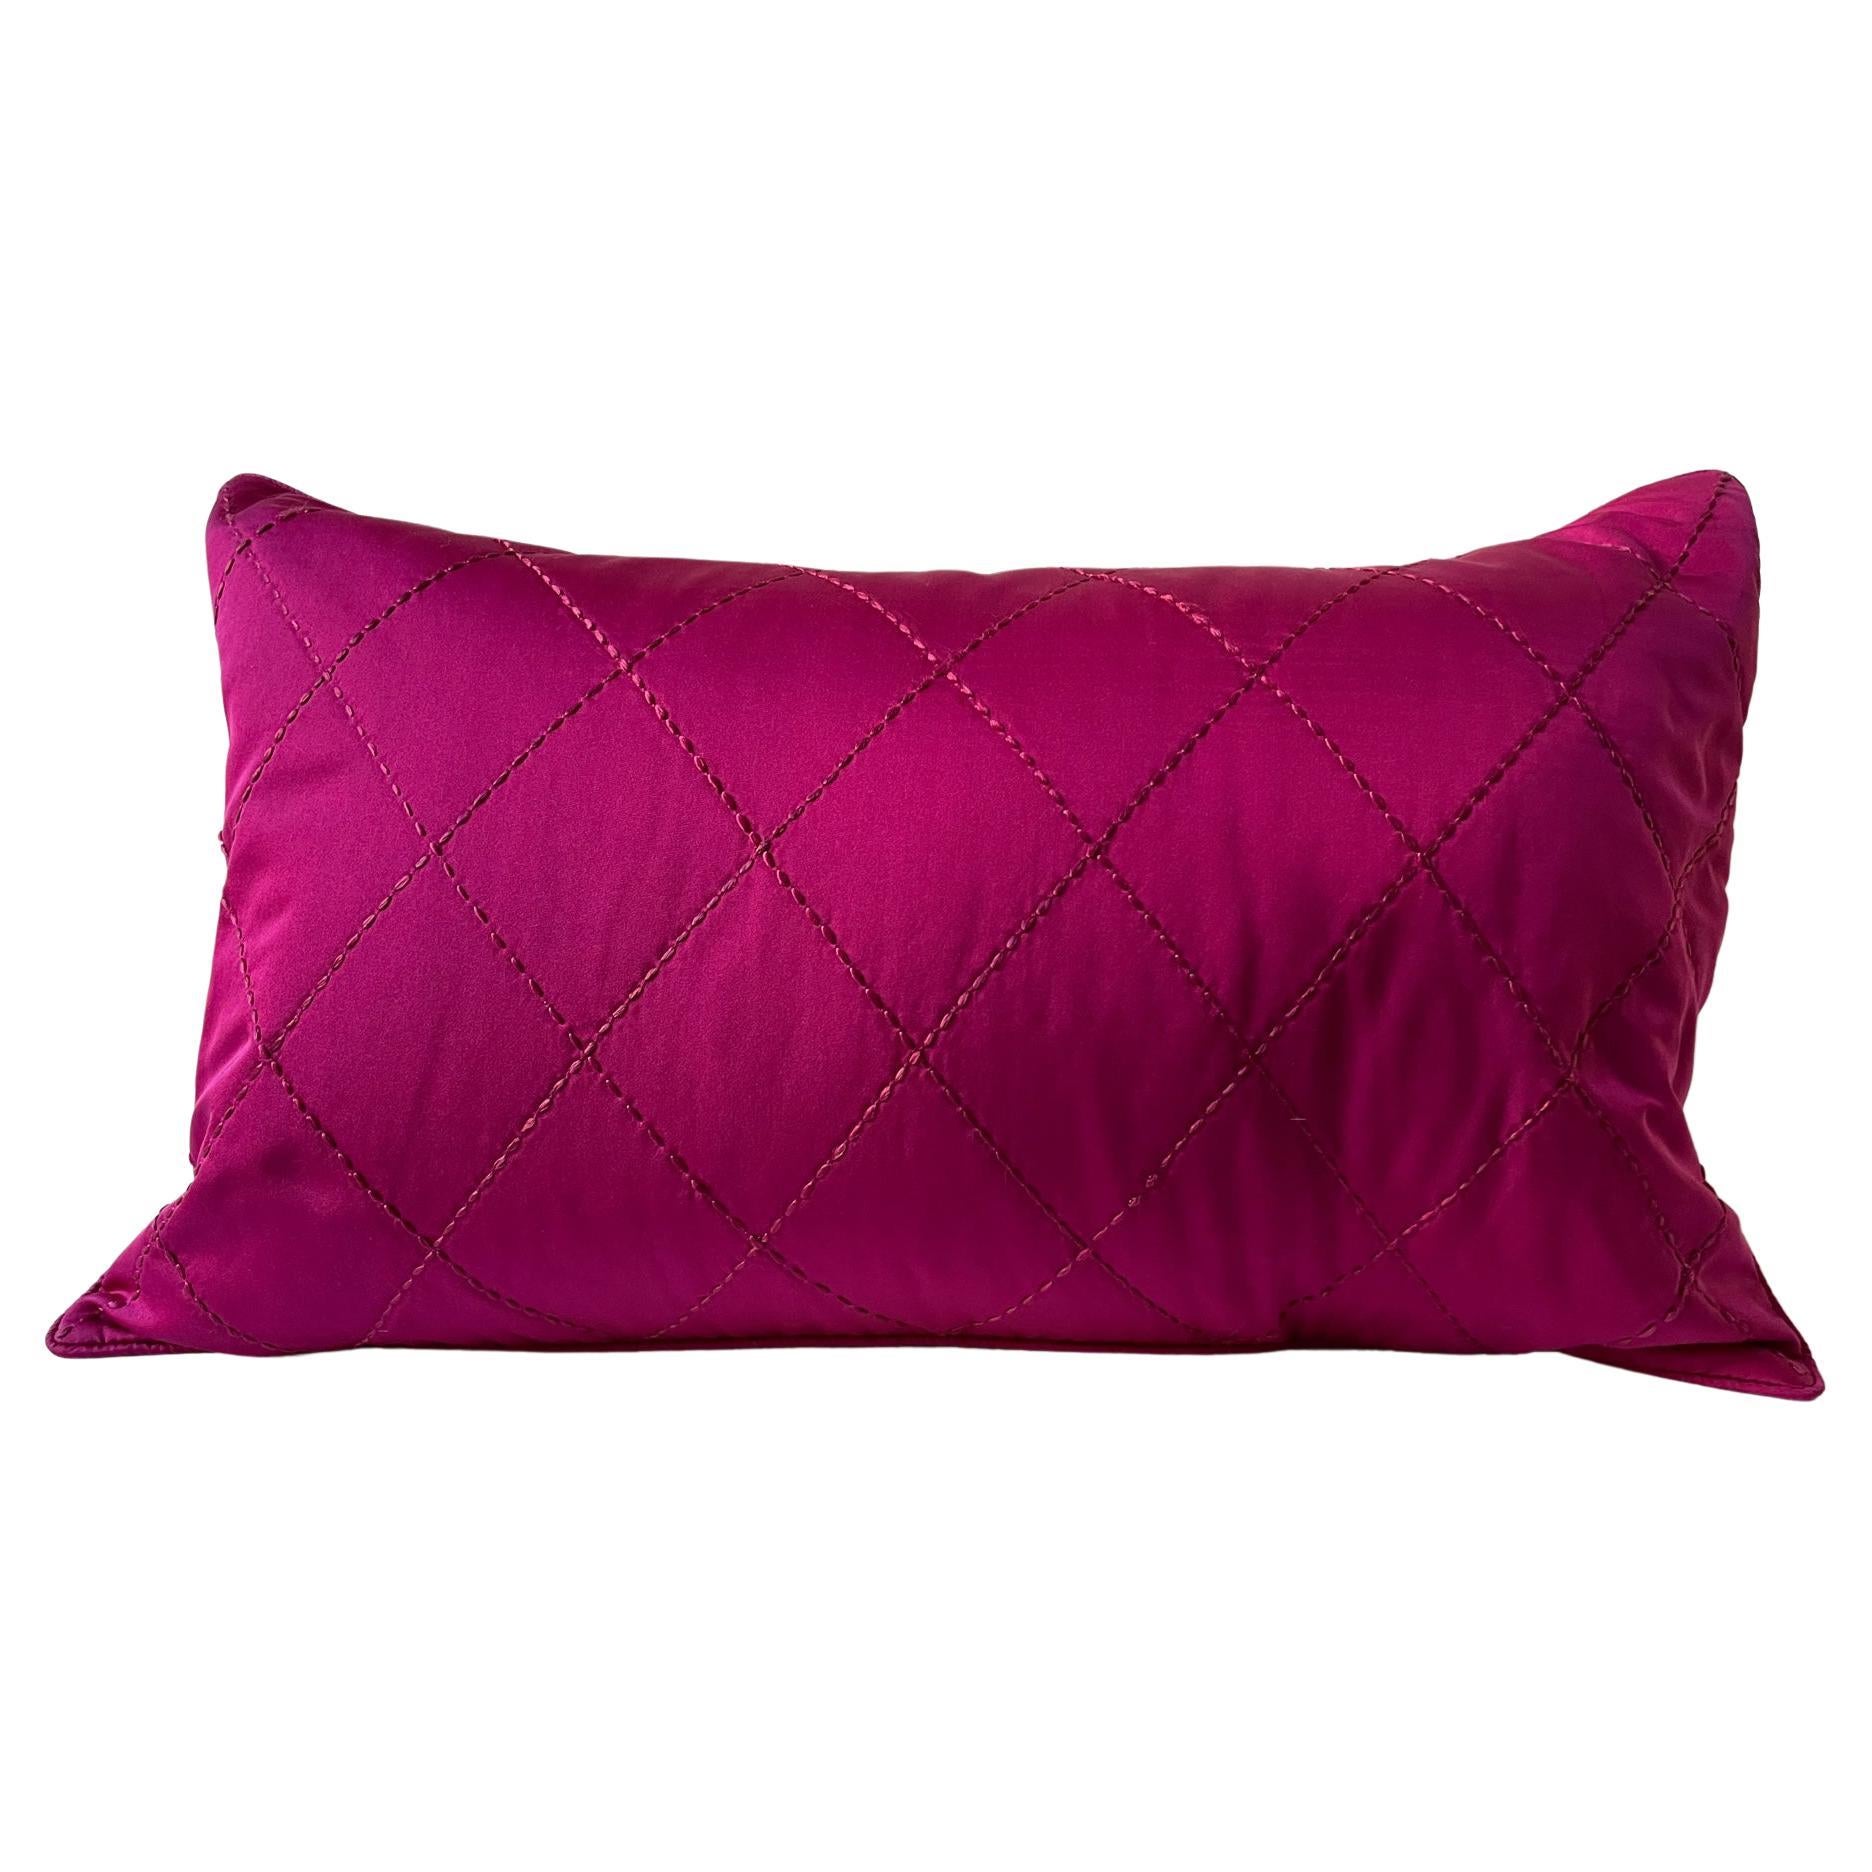 Cushion Cover Hand Quilted Rhombus Pattern in Silk Satin Cherry Red